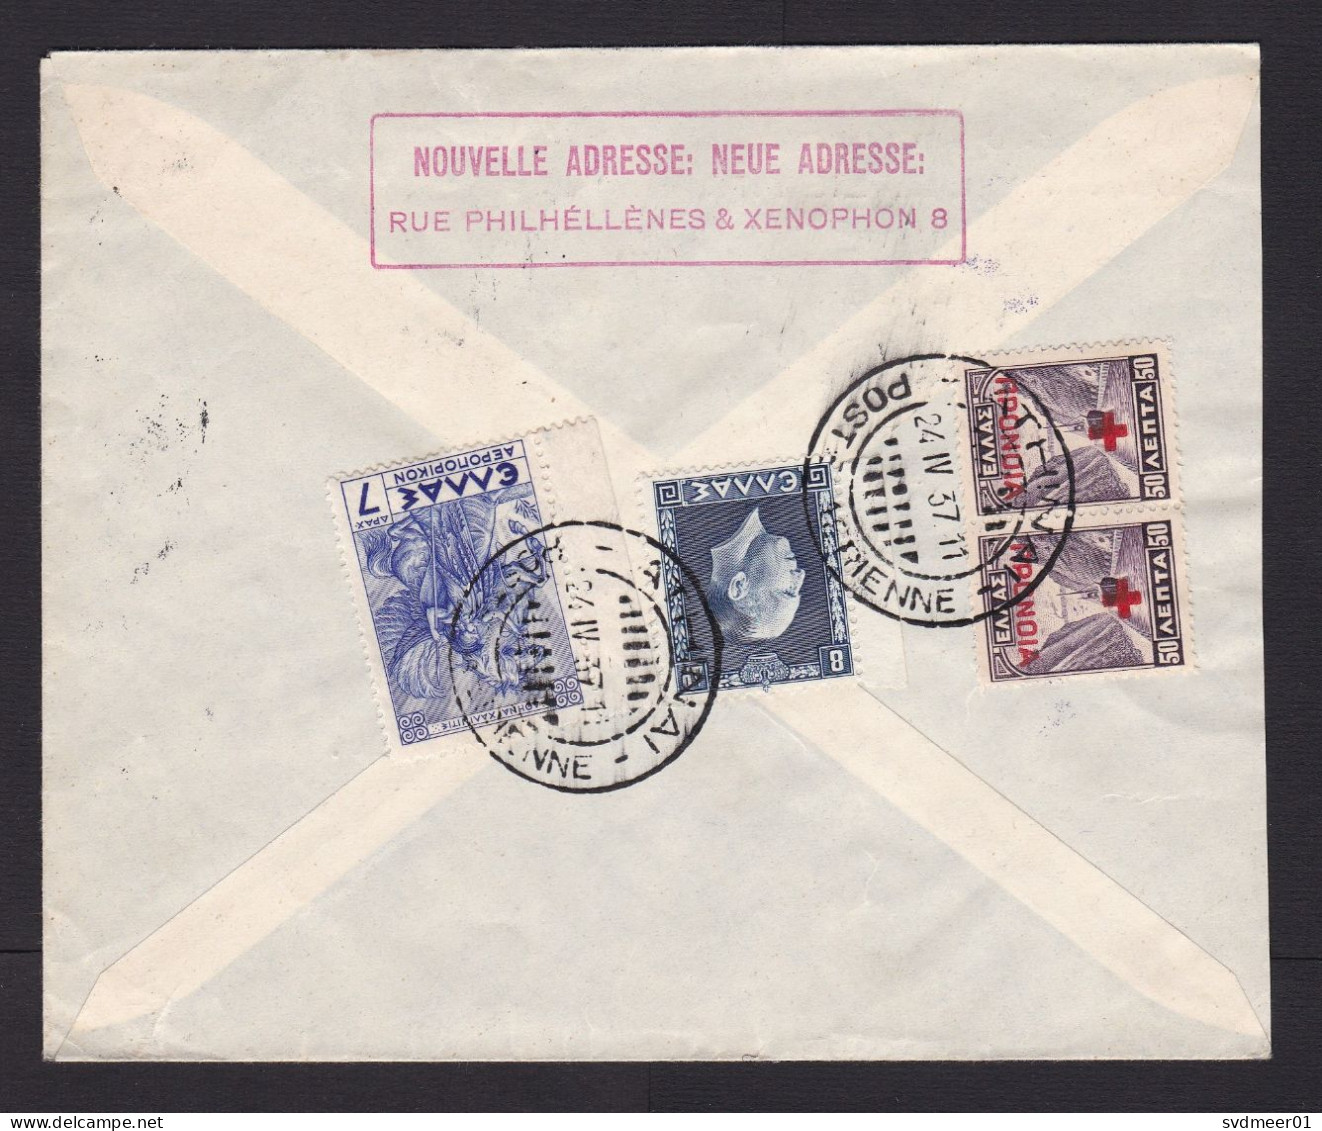 Greece: Airmail Cover To Germany, 1937, 4 Stamps, Overprint Red Cross, Purple Bar Jusqu'a Air Cancel (traces Of Use) - Briefe U. Dokumente